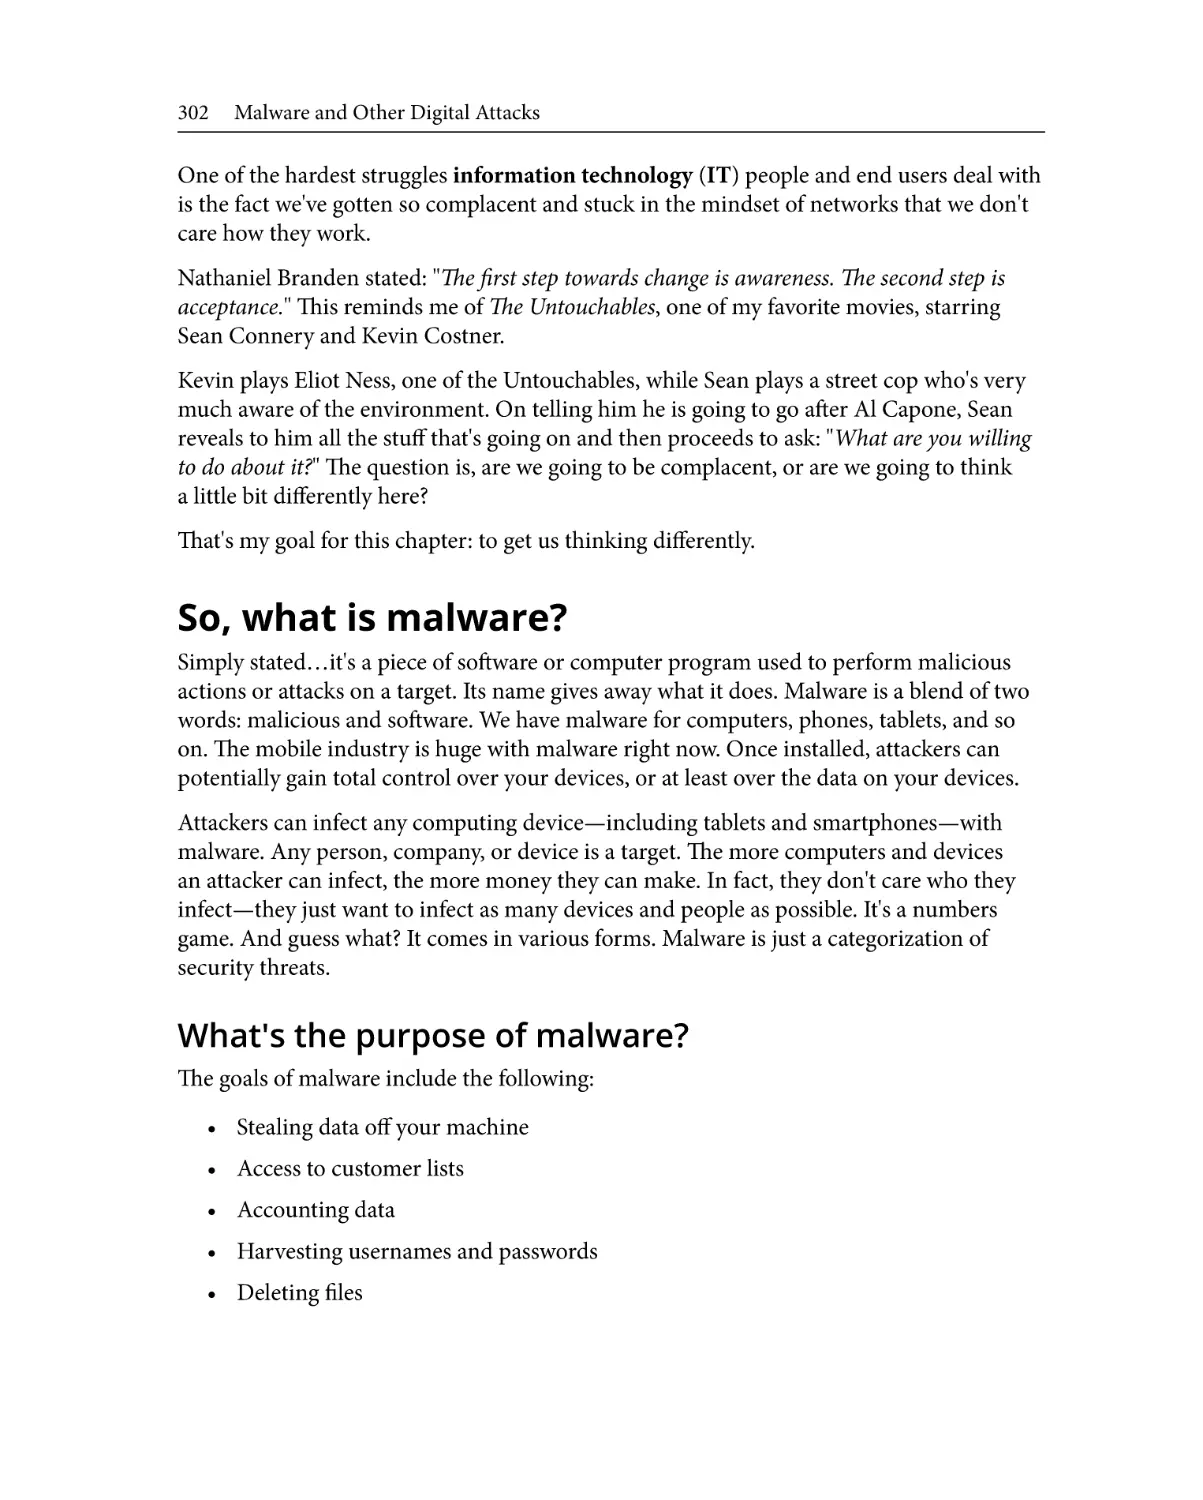 So, what is malware?
What's the purpose of malware?